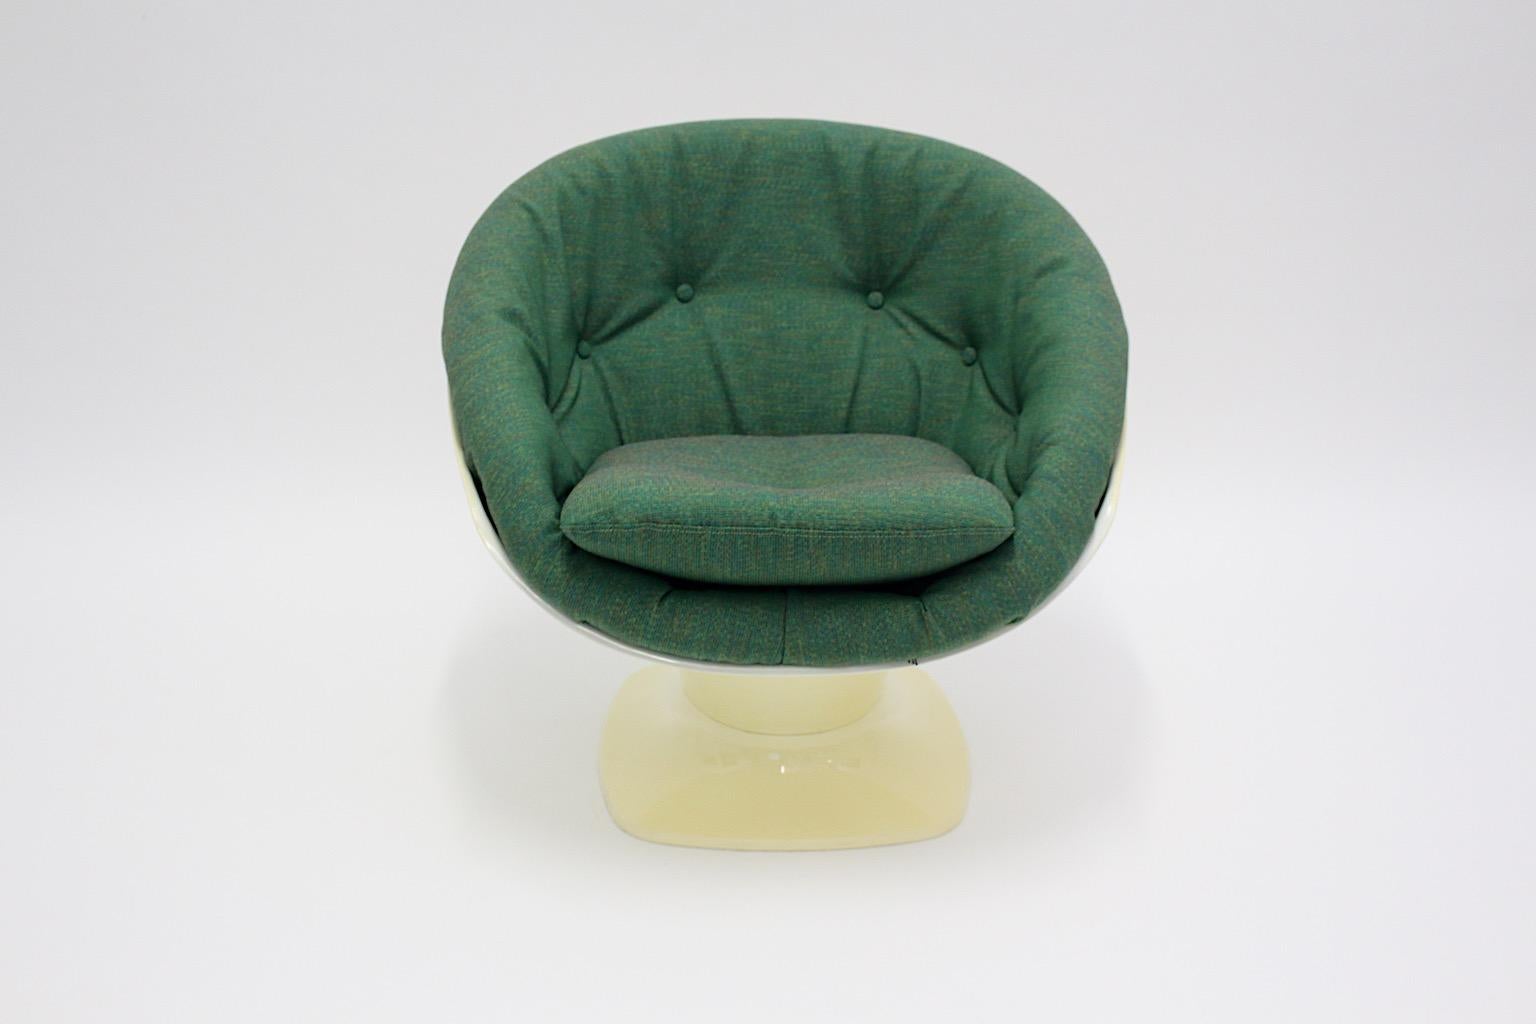 Space Age vintage green and ivory lounge chair from plastic and upholstery by Raphael Raffel (Rafael), France, 1970s
An amazing freestanding lounge chair tulip shape with a rounded seat and an upholstery covered with green high quality textil fabric